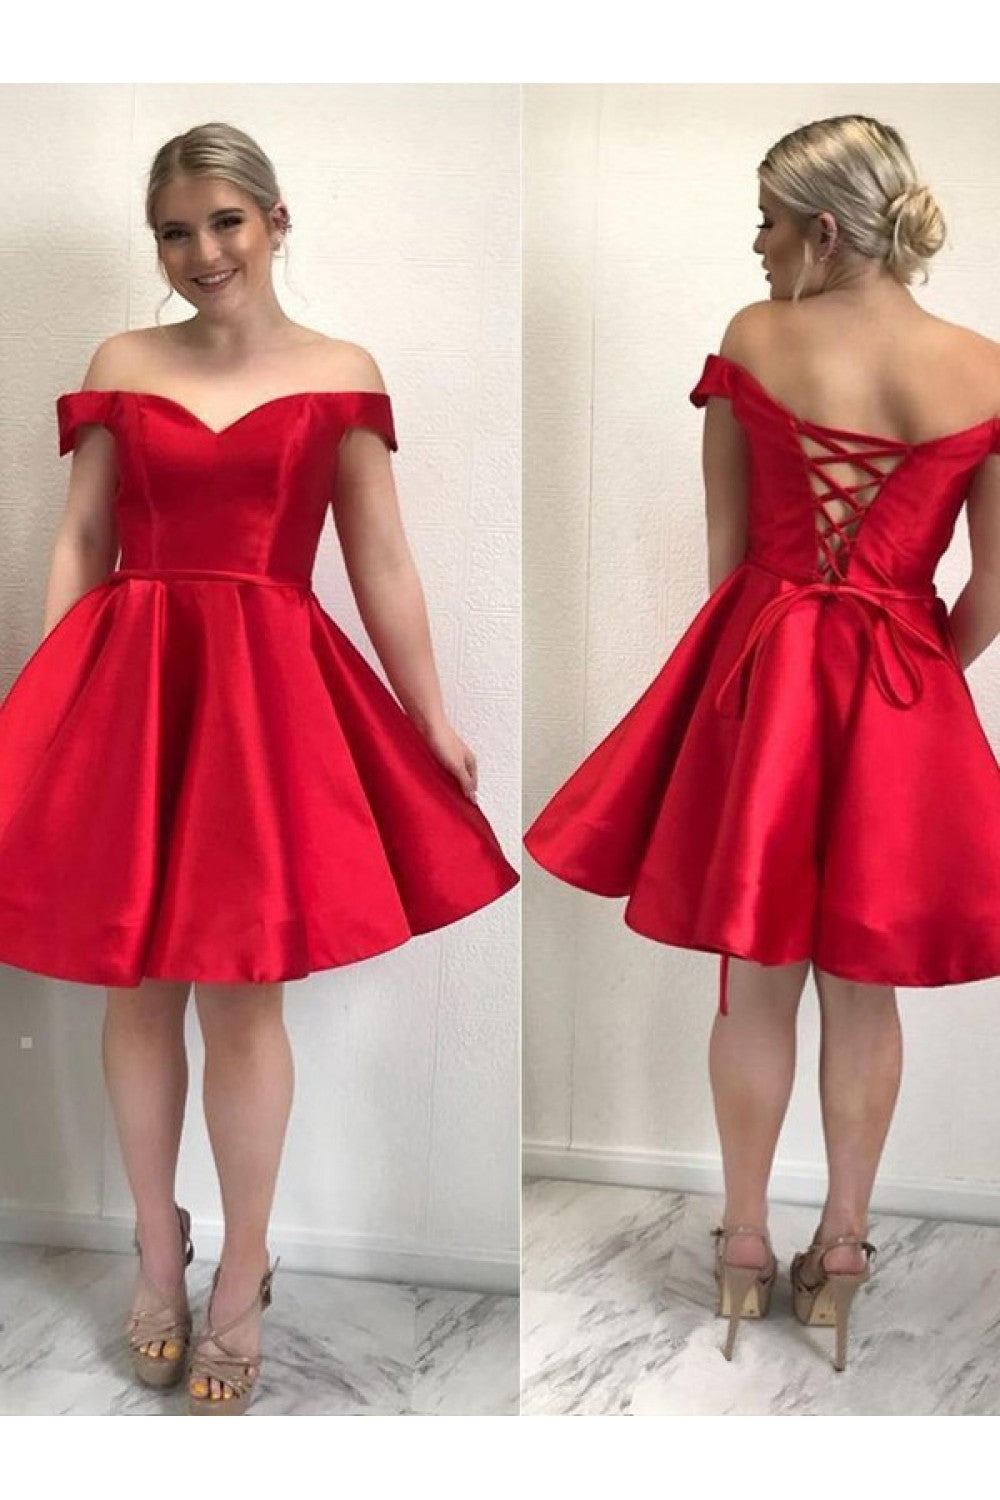 Short Red Homecoming Dress, Short Prom Dresses, Evening Dress ,Winter Formal Dress, Pageant Dance Dresses, Back To School Party Gown, PC0600 - Promcoming